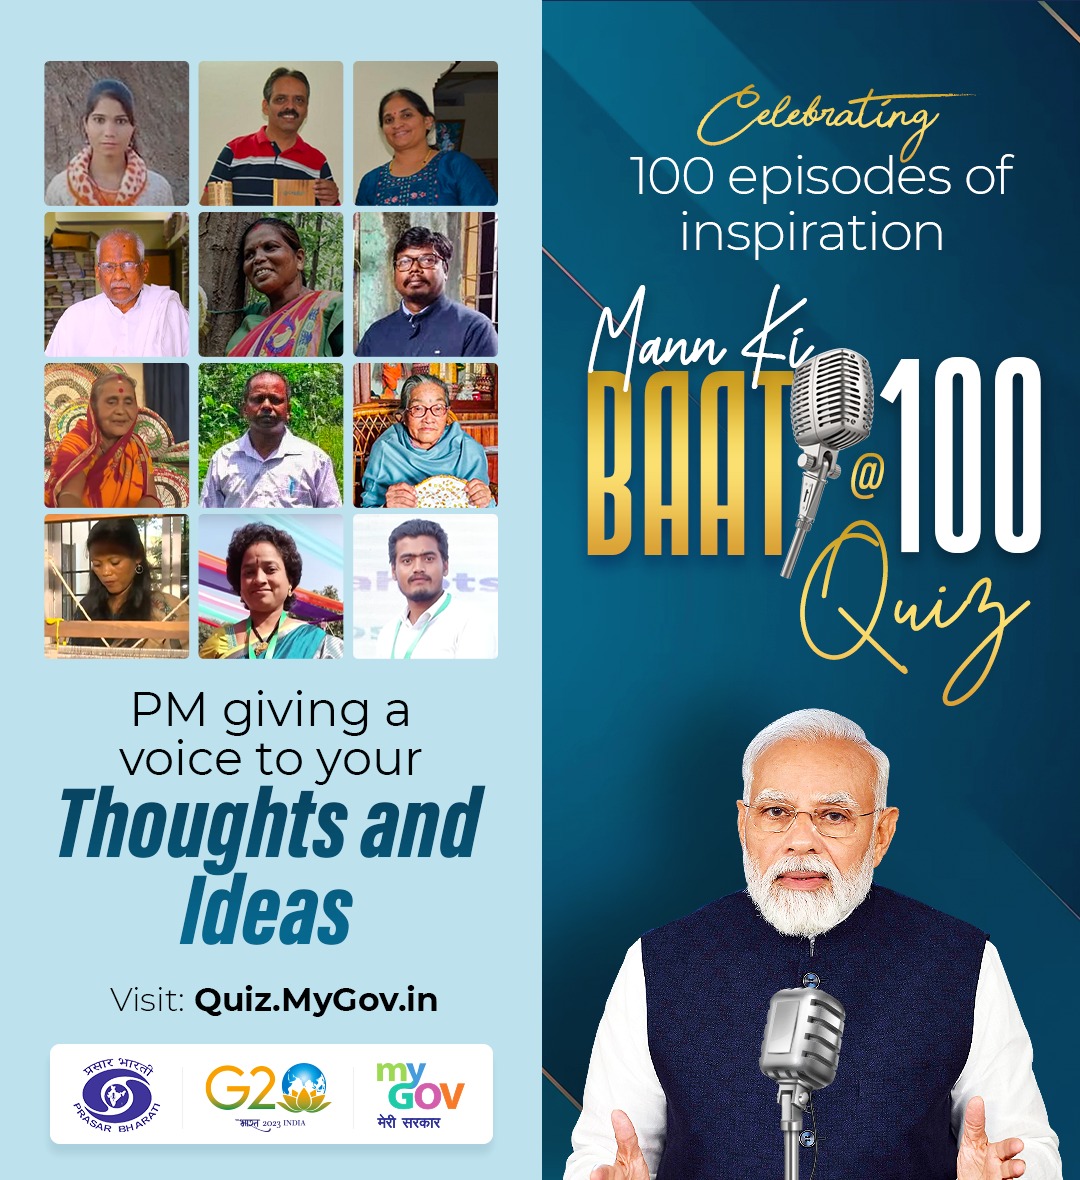 PM @narendramodi is giving voice to your thoughts and ideas! Play the Mann Ki Baat @ 100 Quiz on #MyGov and celebrate the 100th episode of #MannKiBaat. Visit: quiz.mygov.in/quiz/mann-ki-b… @AkashvaniAIR